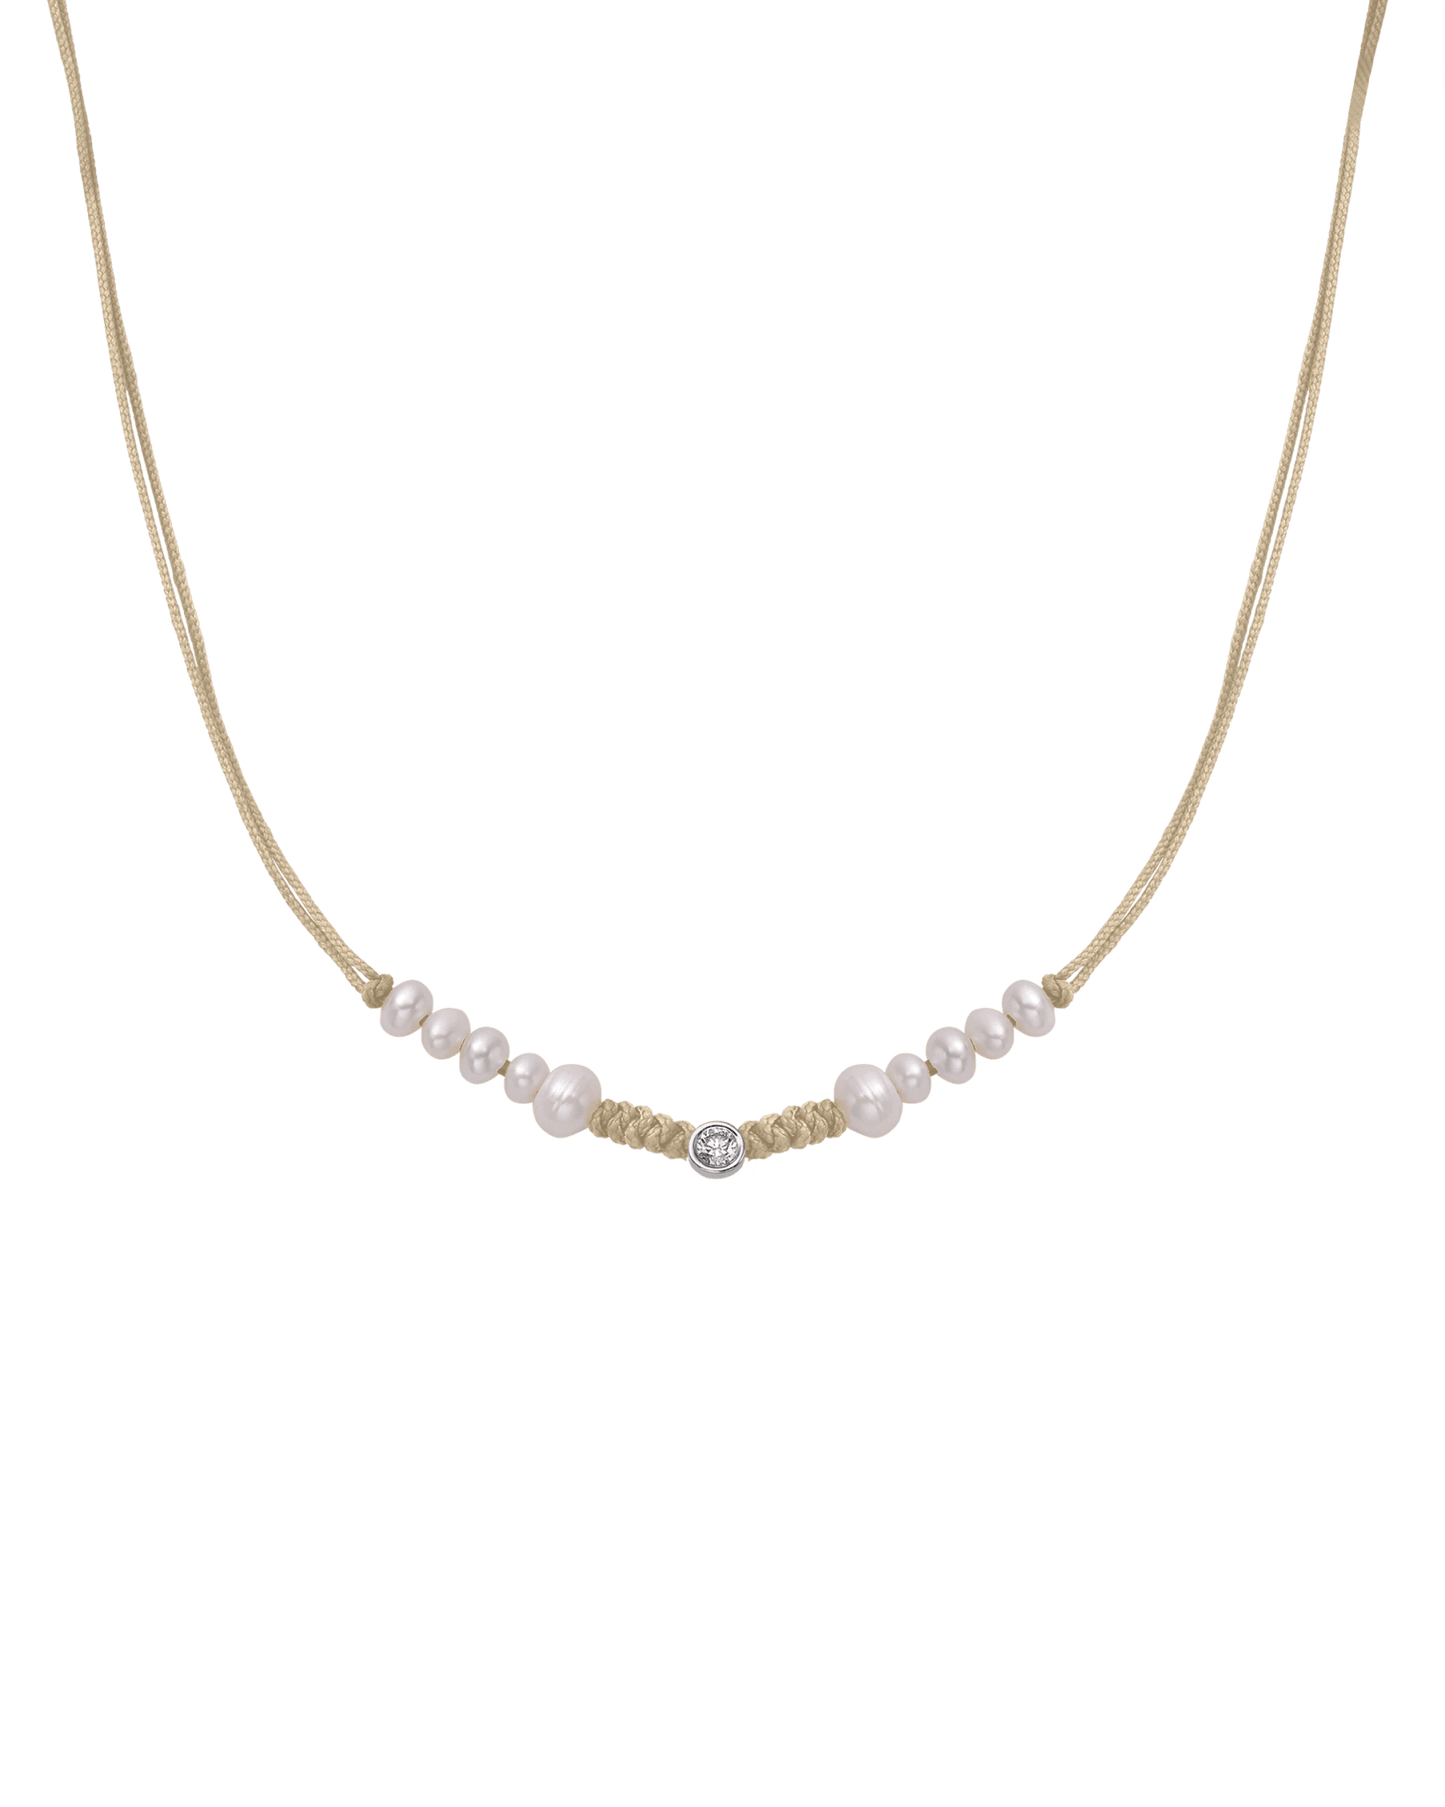 Ten Natural Pearl String of Love Necklace - 14K White Gold Necklaces 14K Solid Gold Beige Large: 0.1ct 